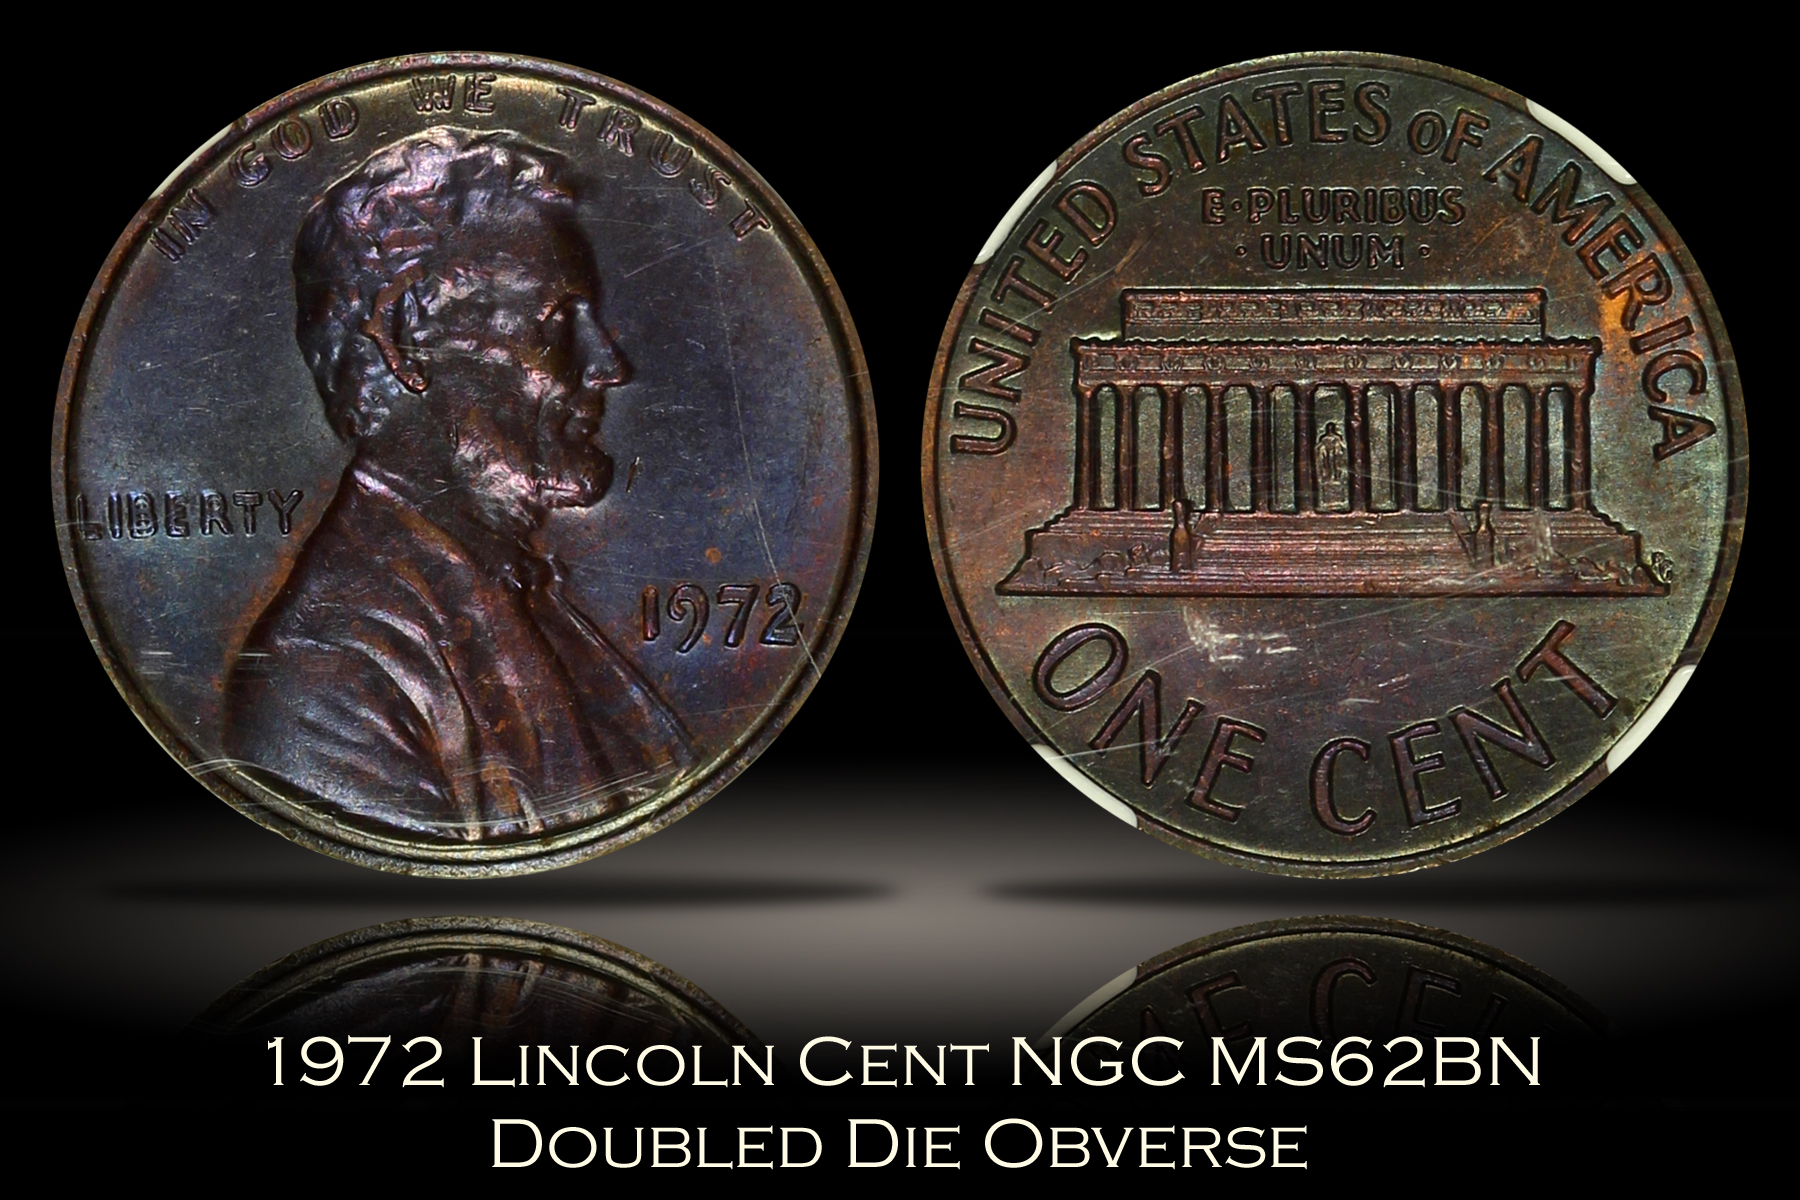 1972 Doubled Die Obverse Lincoln Cent NGC MS62BN